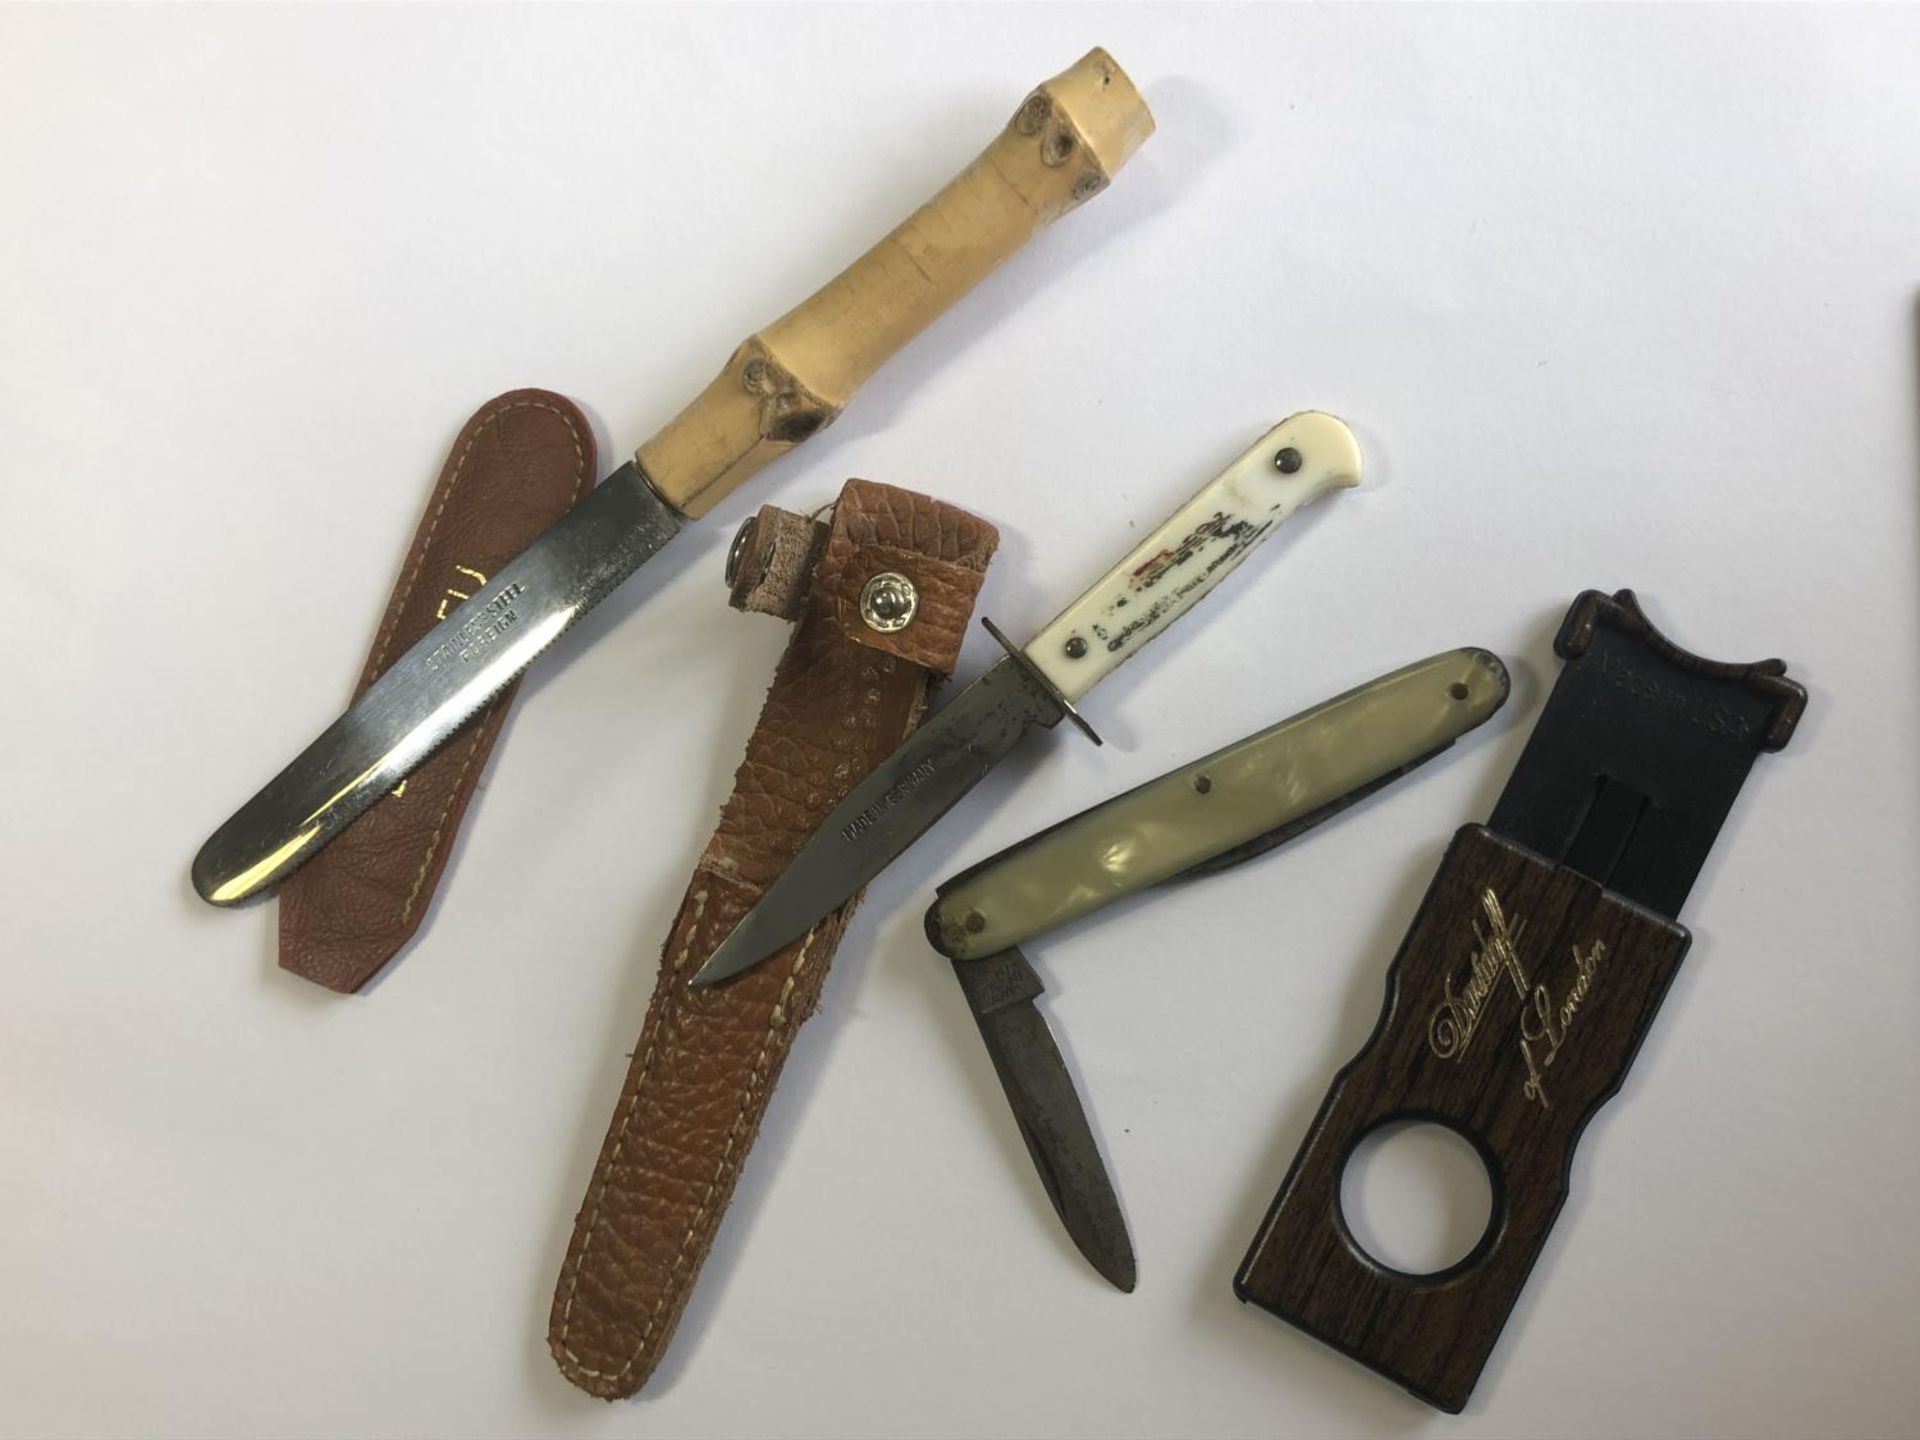 A Davidoff of London cigar cutter together with a group of vintage pocket knives or fruit knives - Image 2 of 4